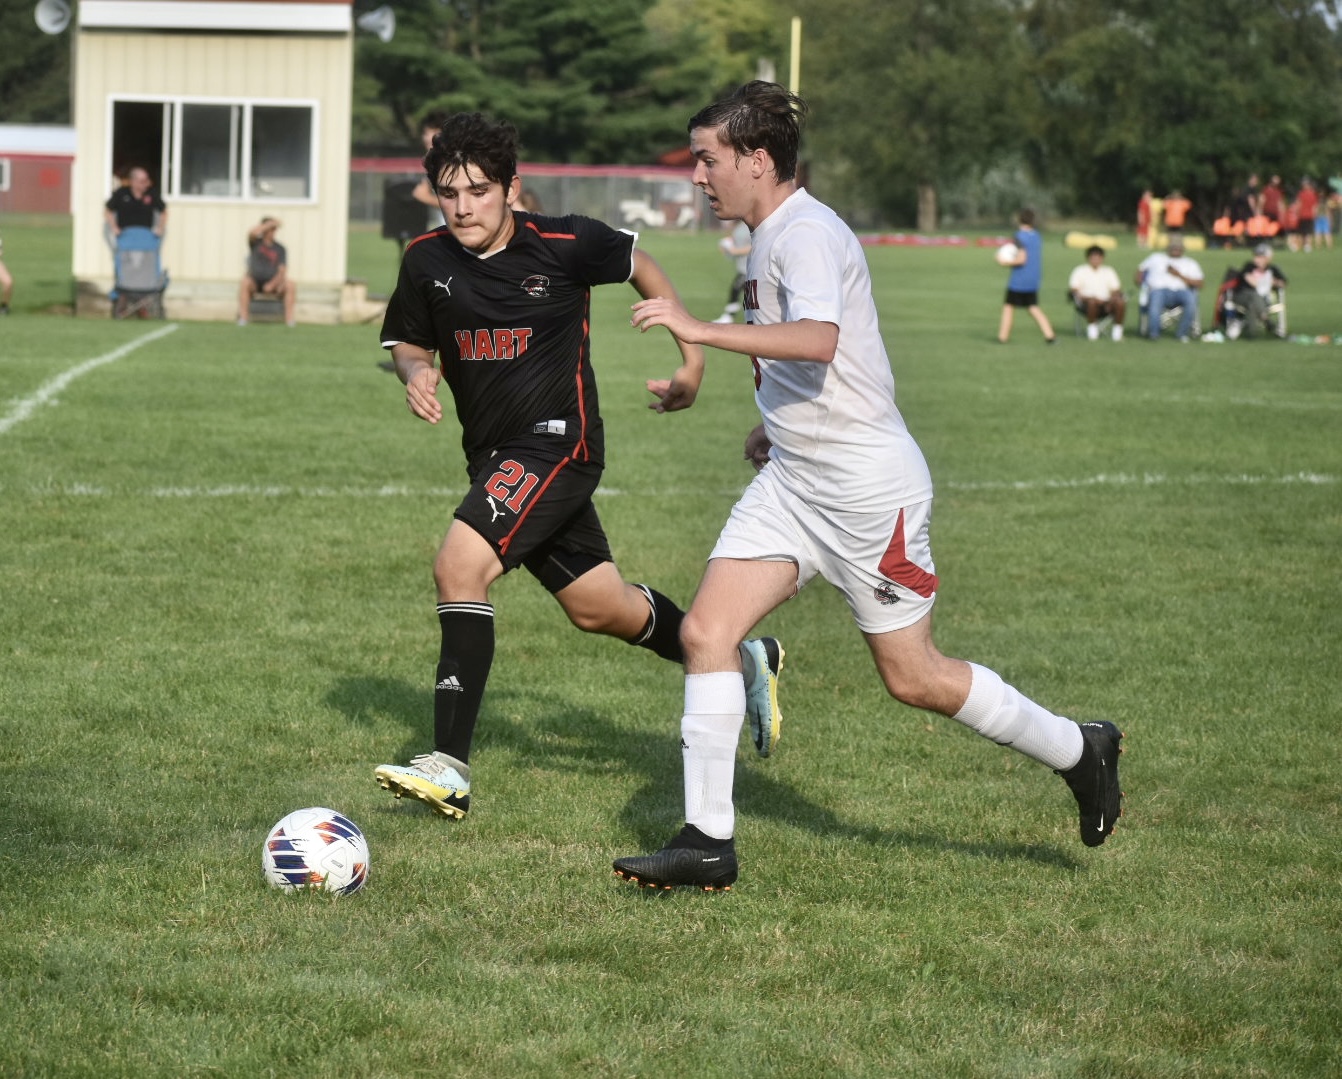 Inexperience evident in Hart’s lopsided soccer loss to Suttons Bay